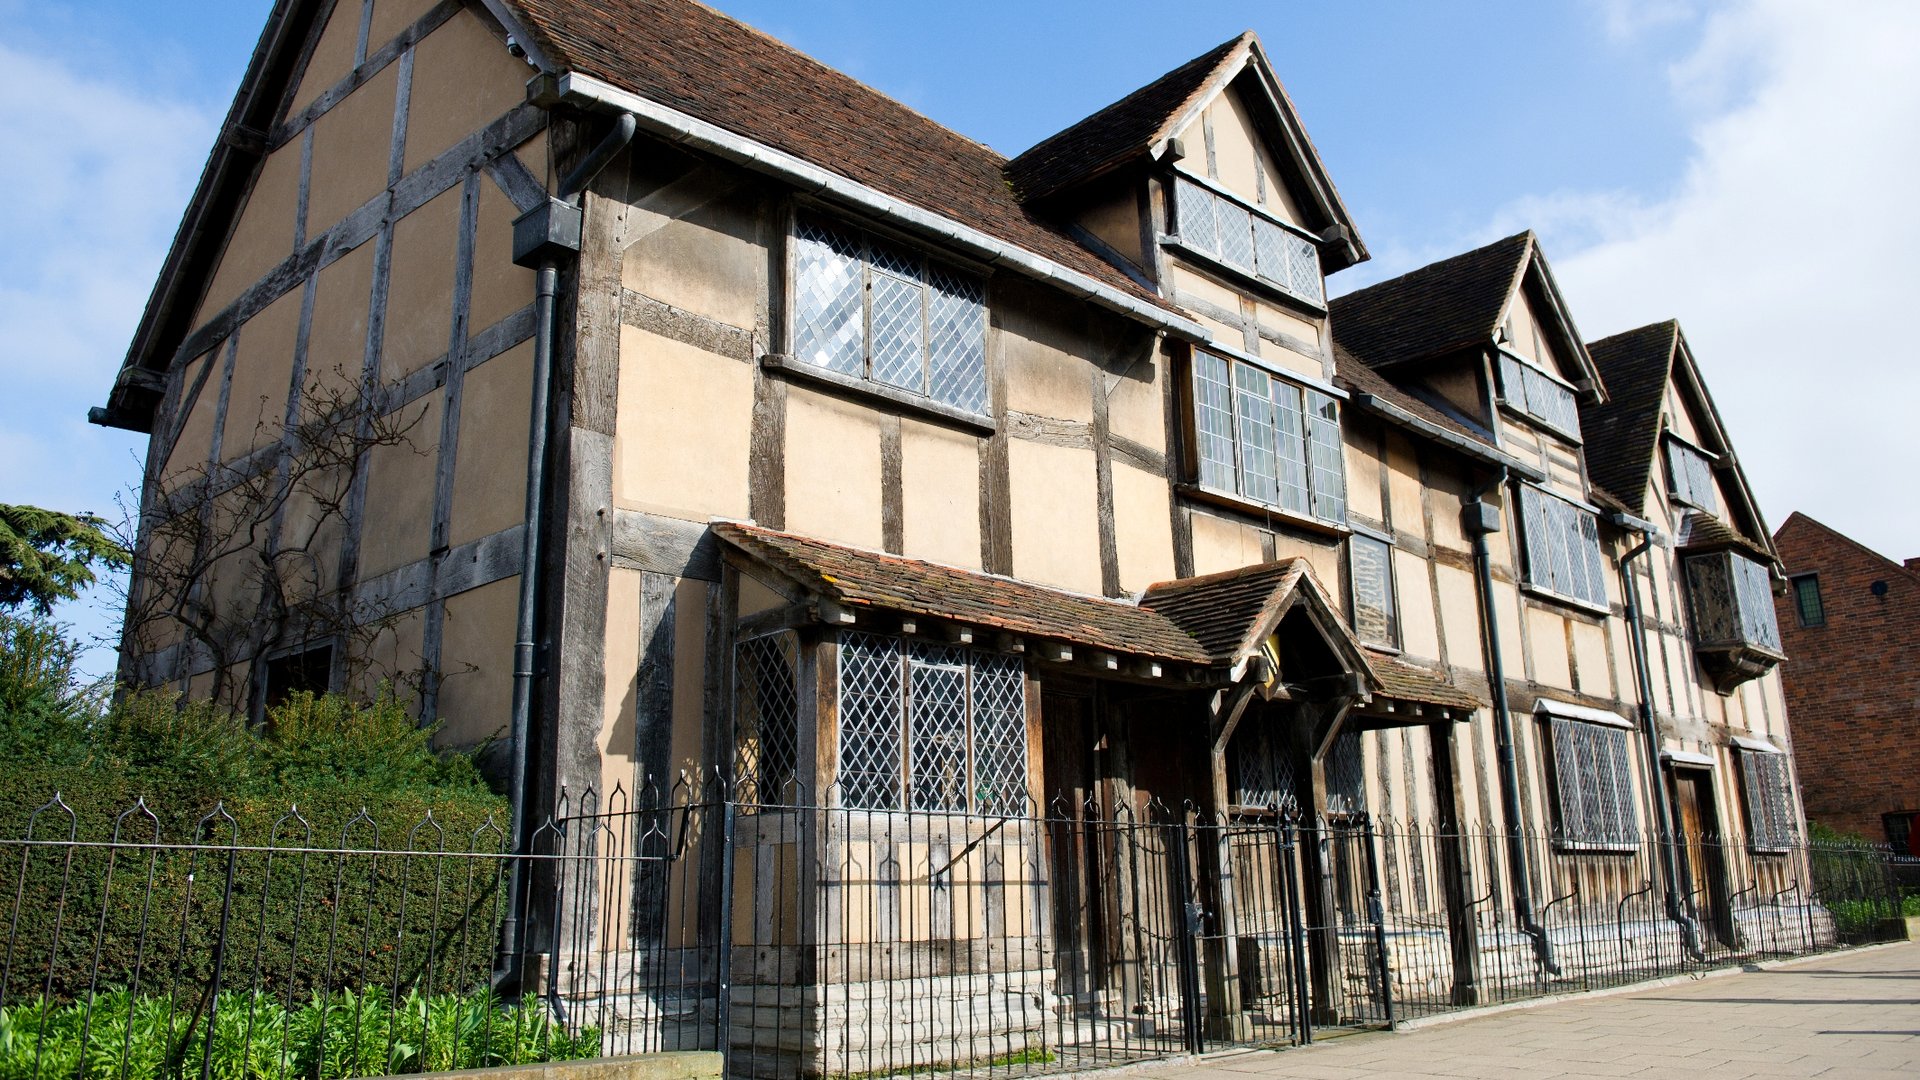 Hyde Park Cars Taxi Cab Tours to See the birthplace of William Shakespeare